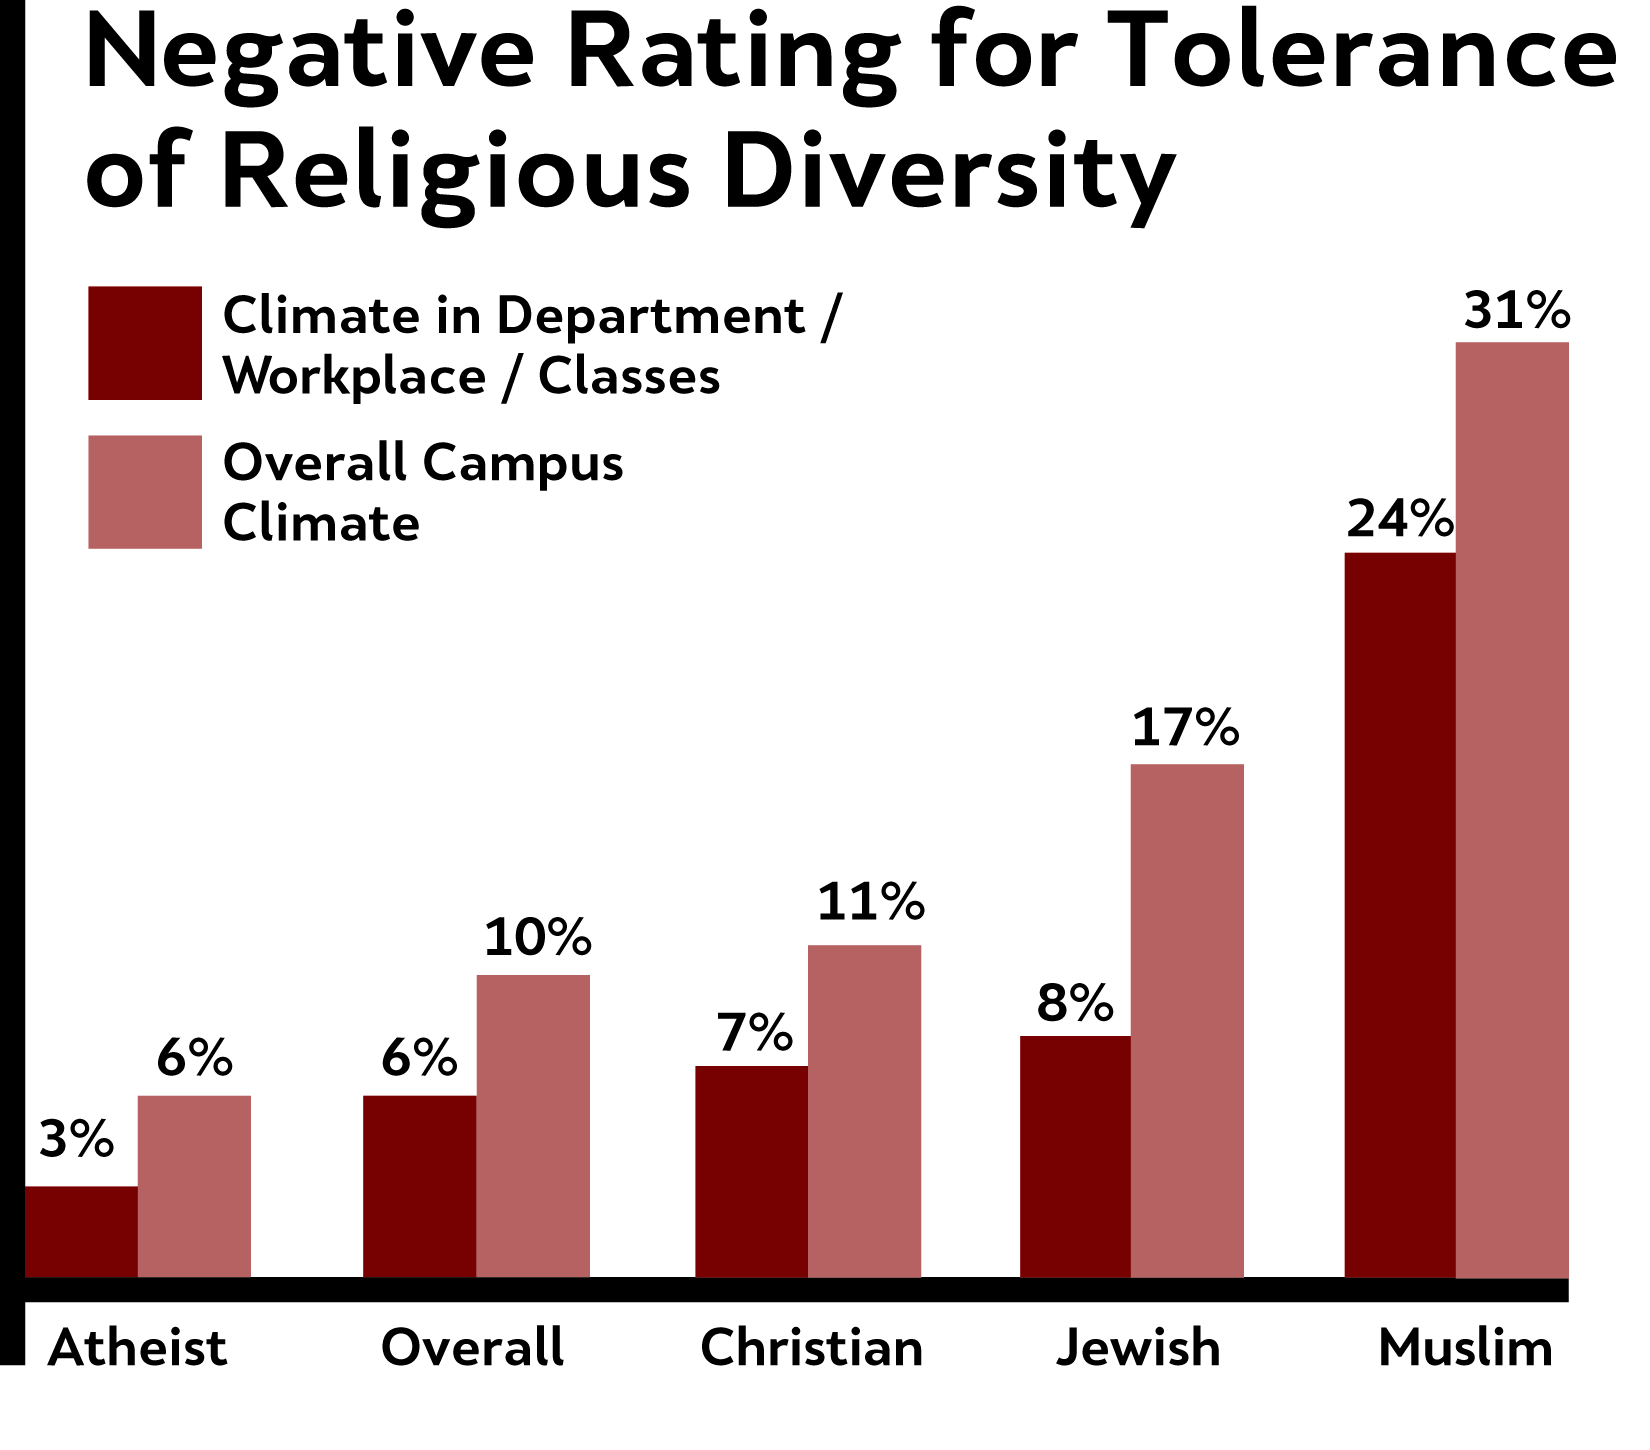 Percentages are for all respondents; numbers for students alone were typically higher. Responses coded as secular and non-religious (5%, 7%), other (5%, 10%), and no response (5%, 8%) are not represented above.